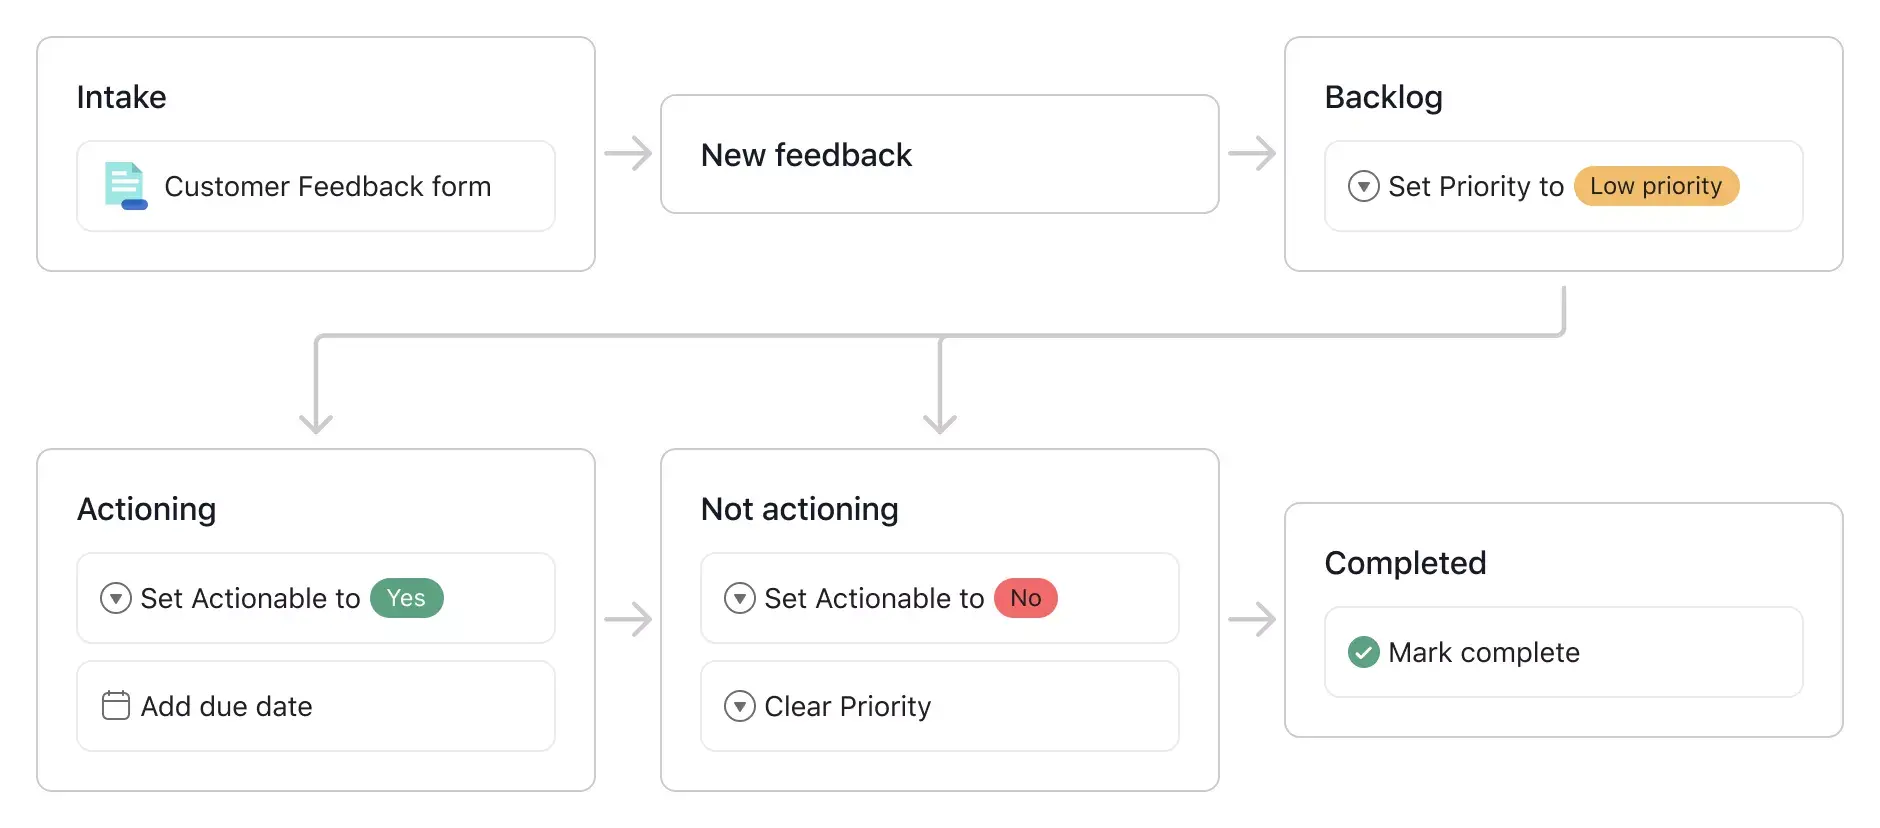 [Product UI] Customer feedback process map template (workflow builder)